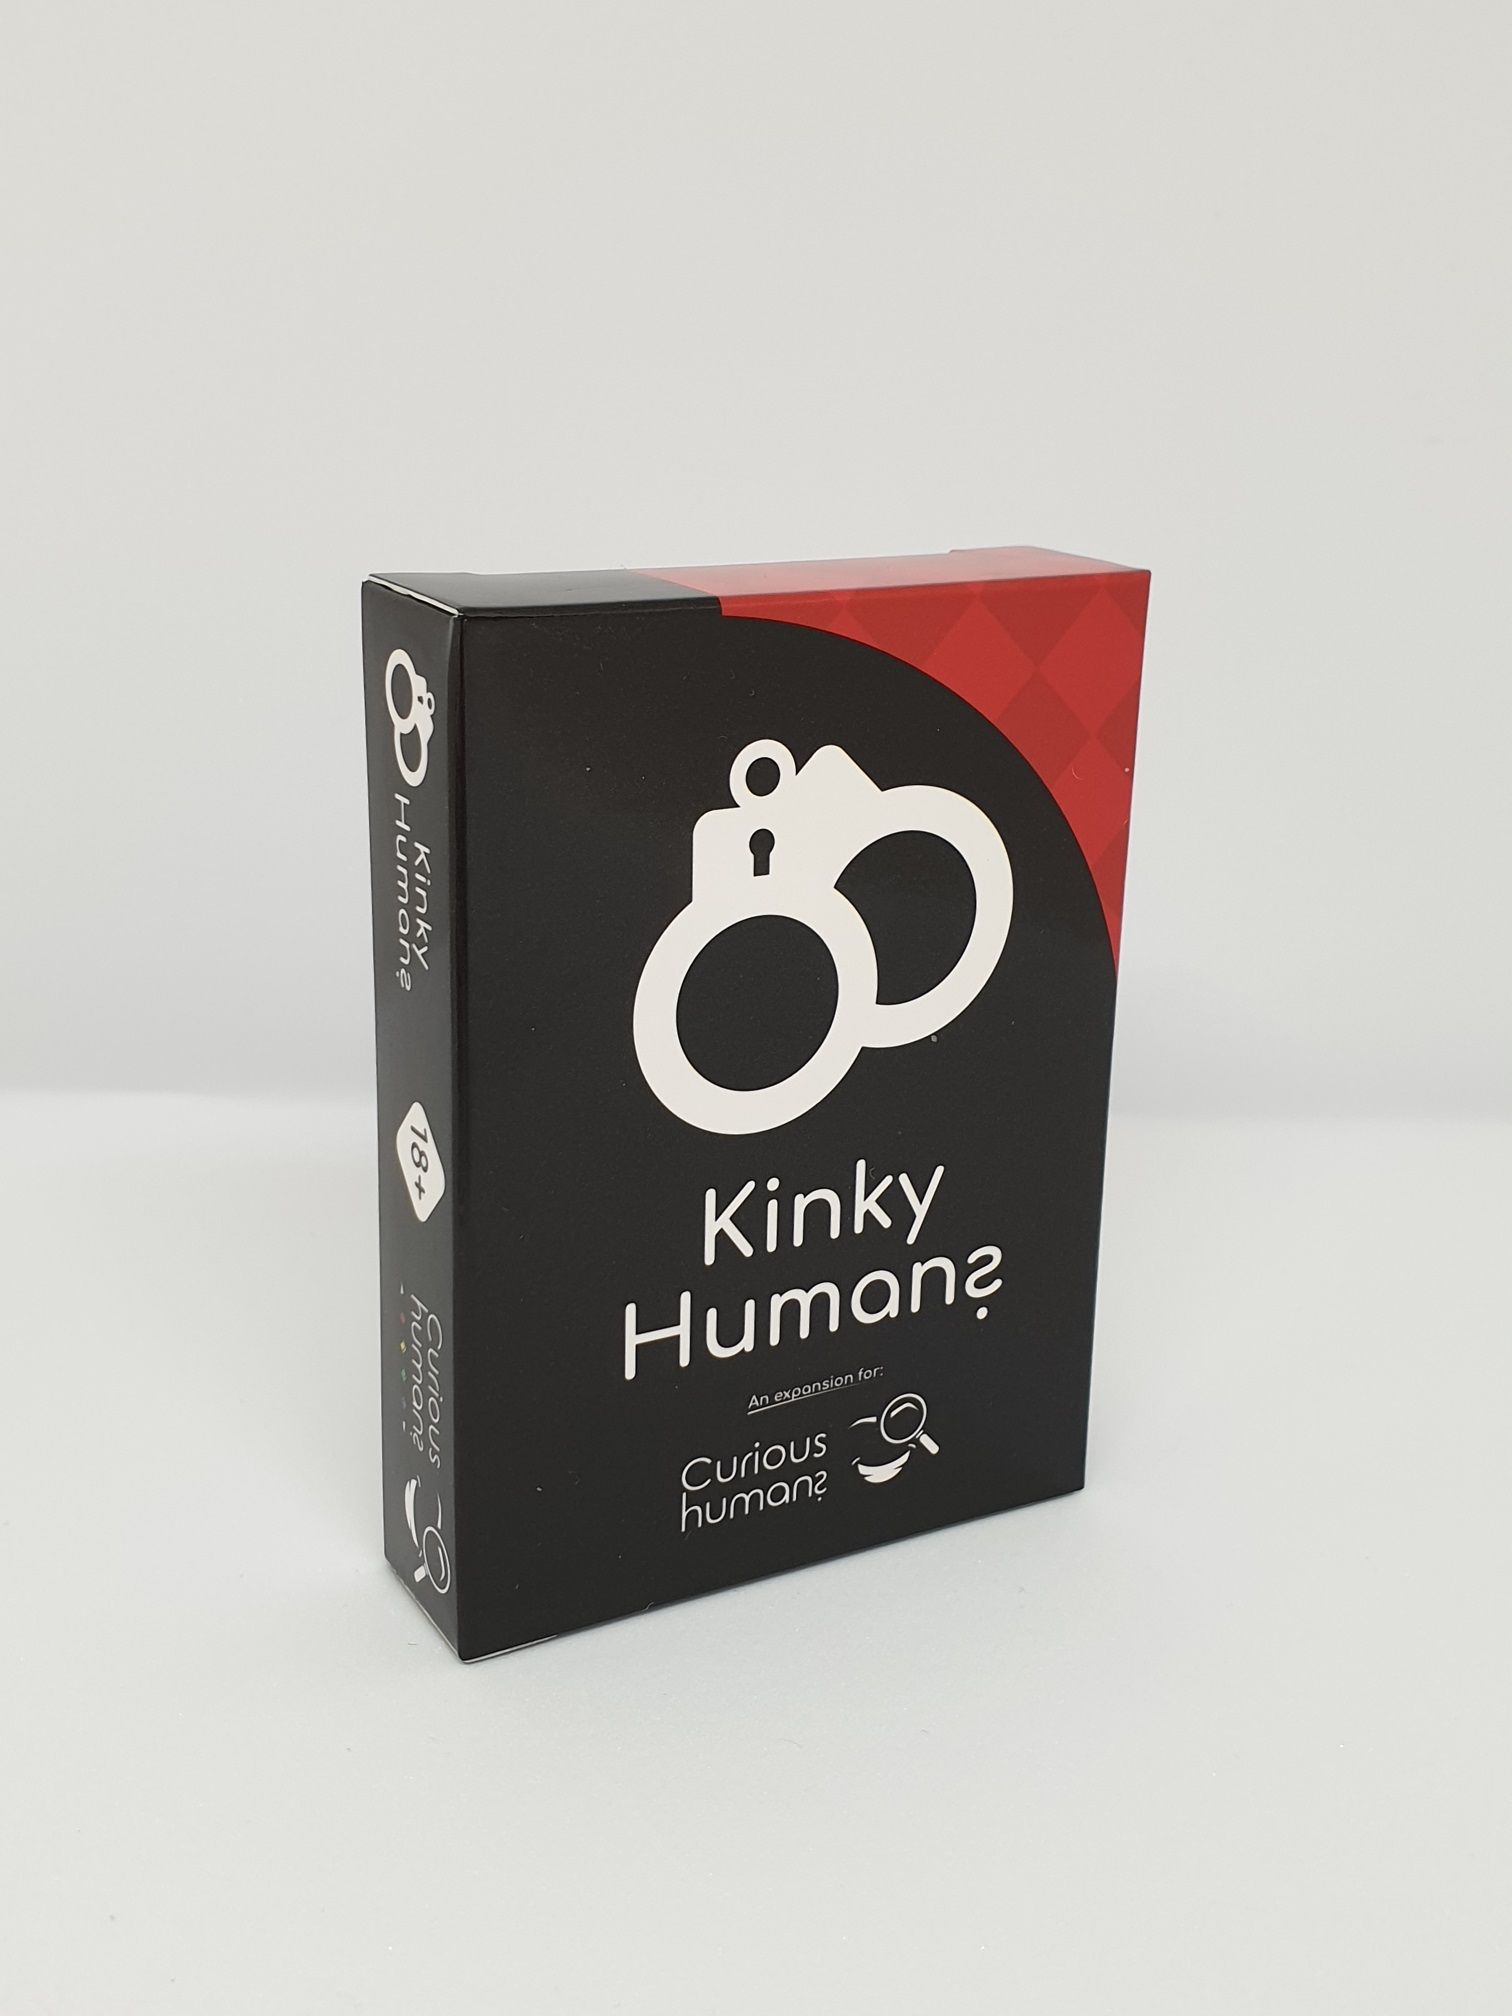 Curious Humans: Kinky Humans Expansion Pack